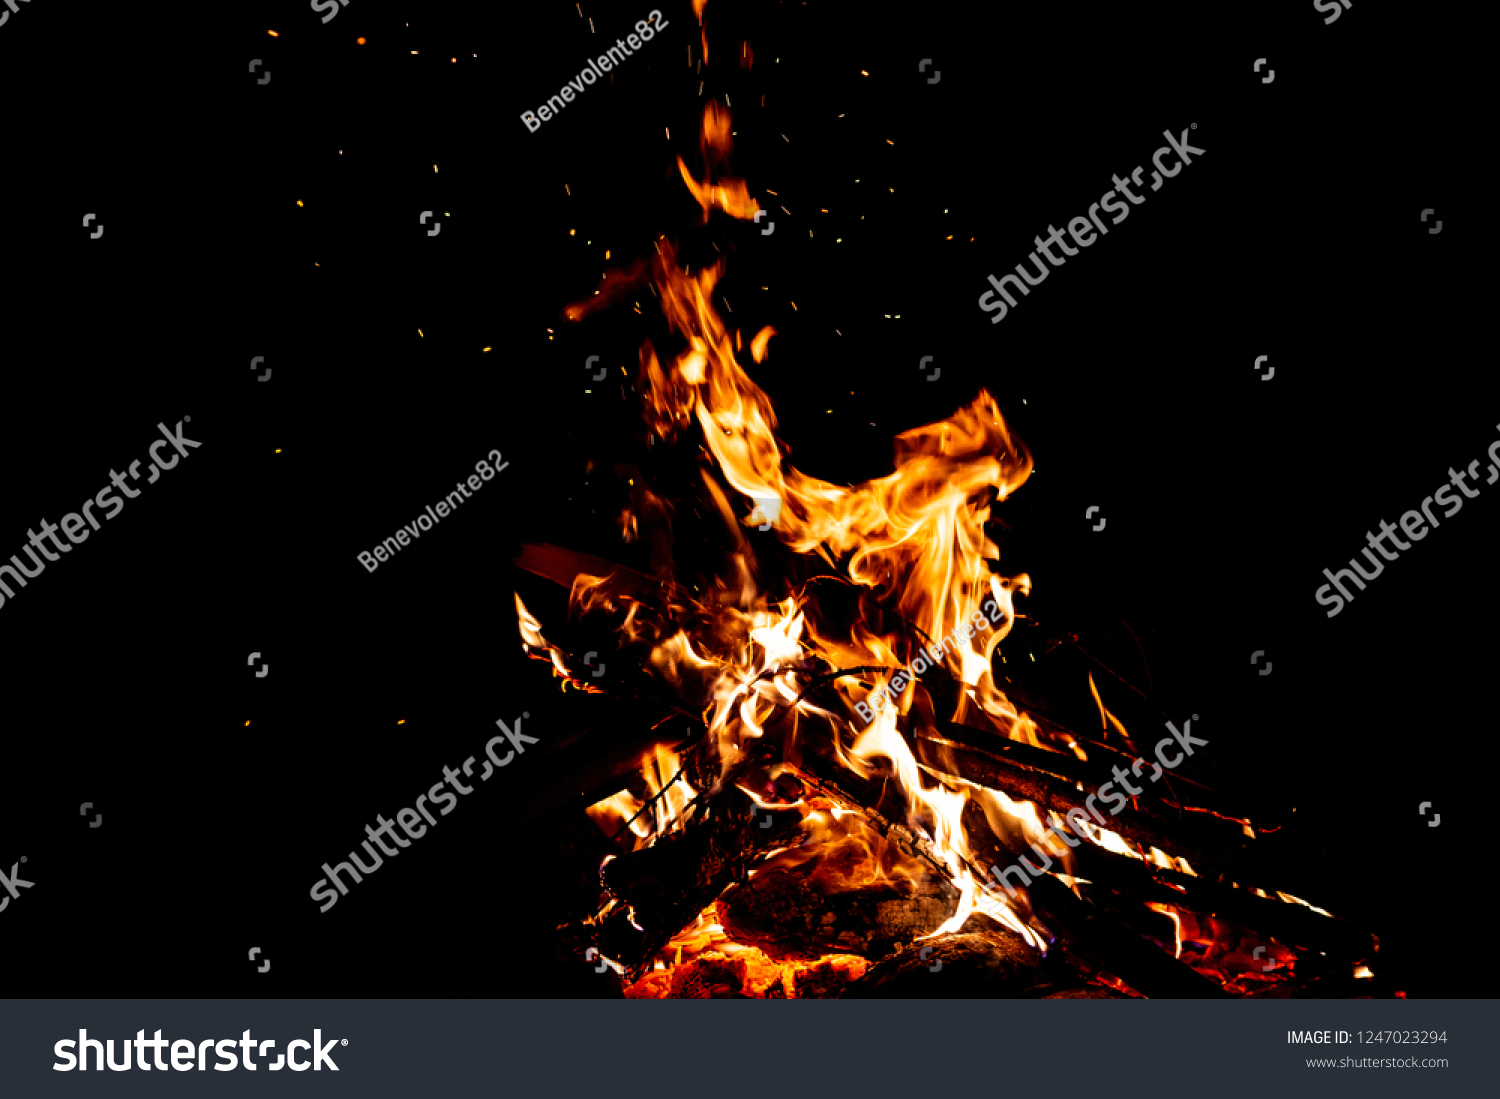 Burning woods with firesparks, flame and smoke. Strange weird odd elemental fiery figures on black background. Coal and ash. Abstract shapes at night. Bonfire outdoor on nature. Strenght of element #1247023294